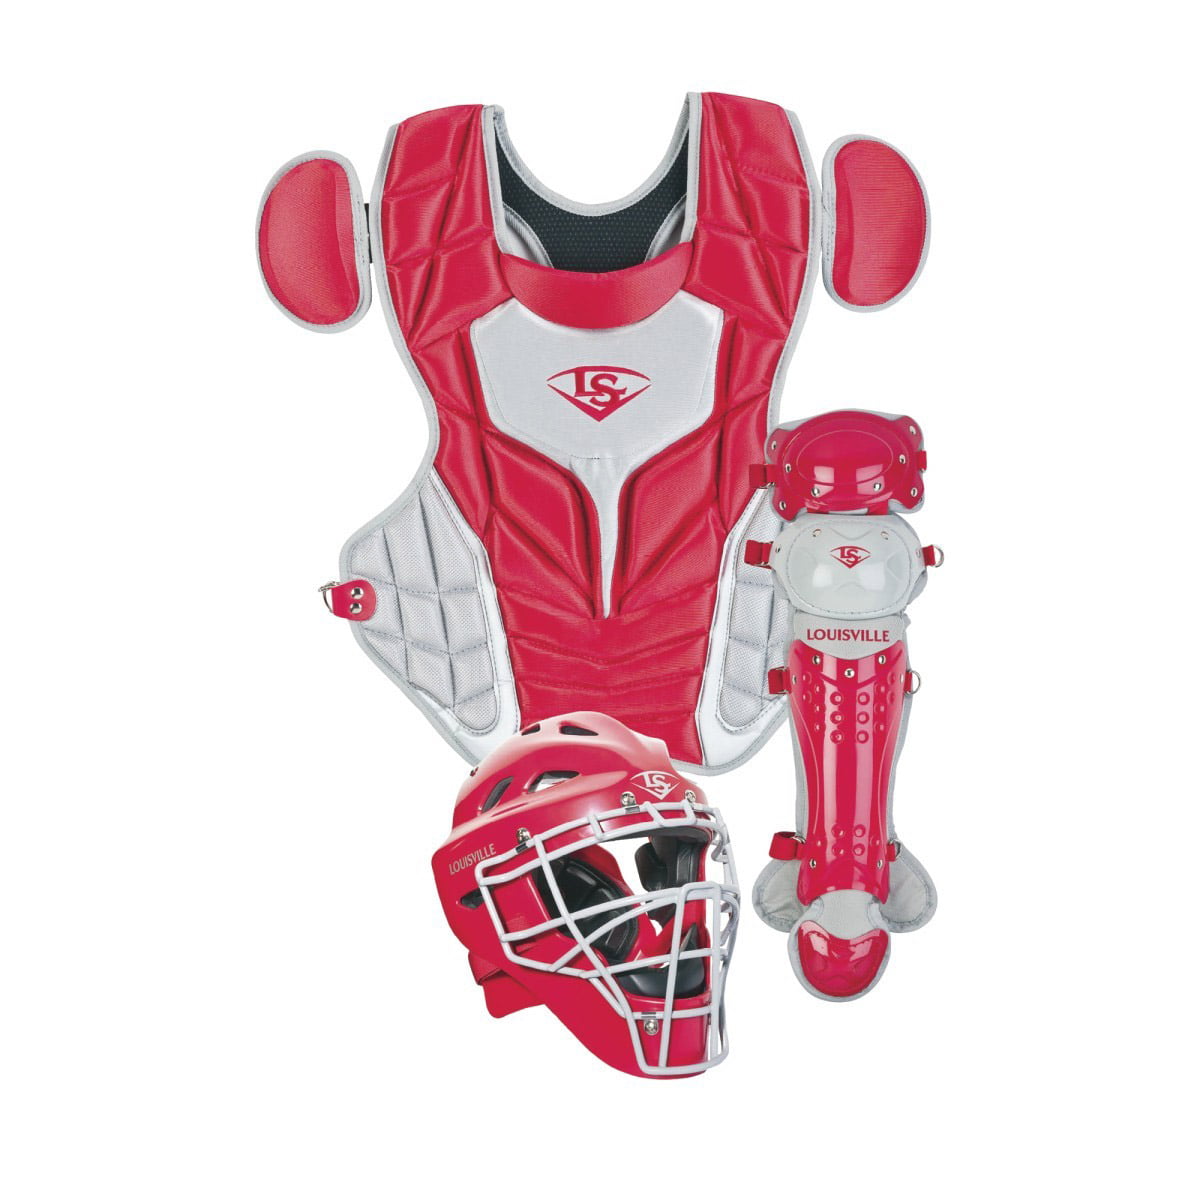 Louisville Slugger Youth PG Series 5 Catchers Set Certified Refurbished 